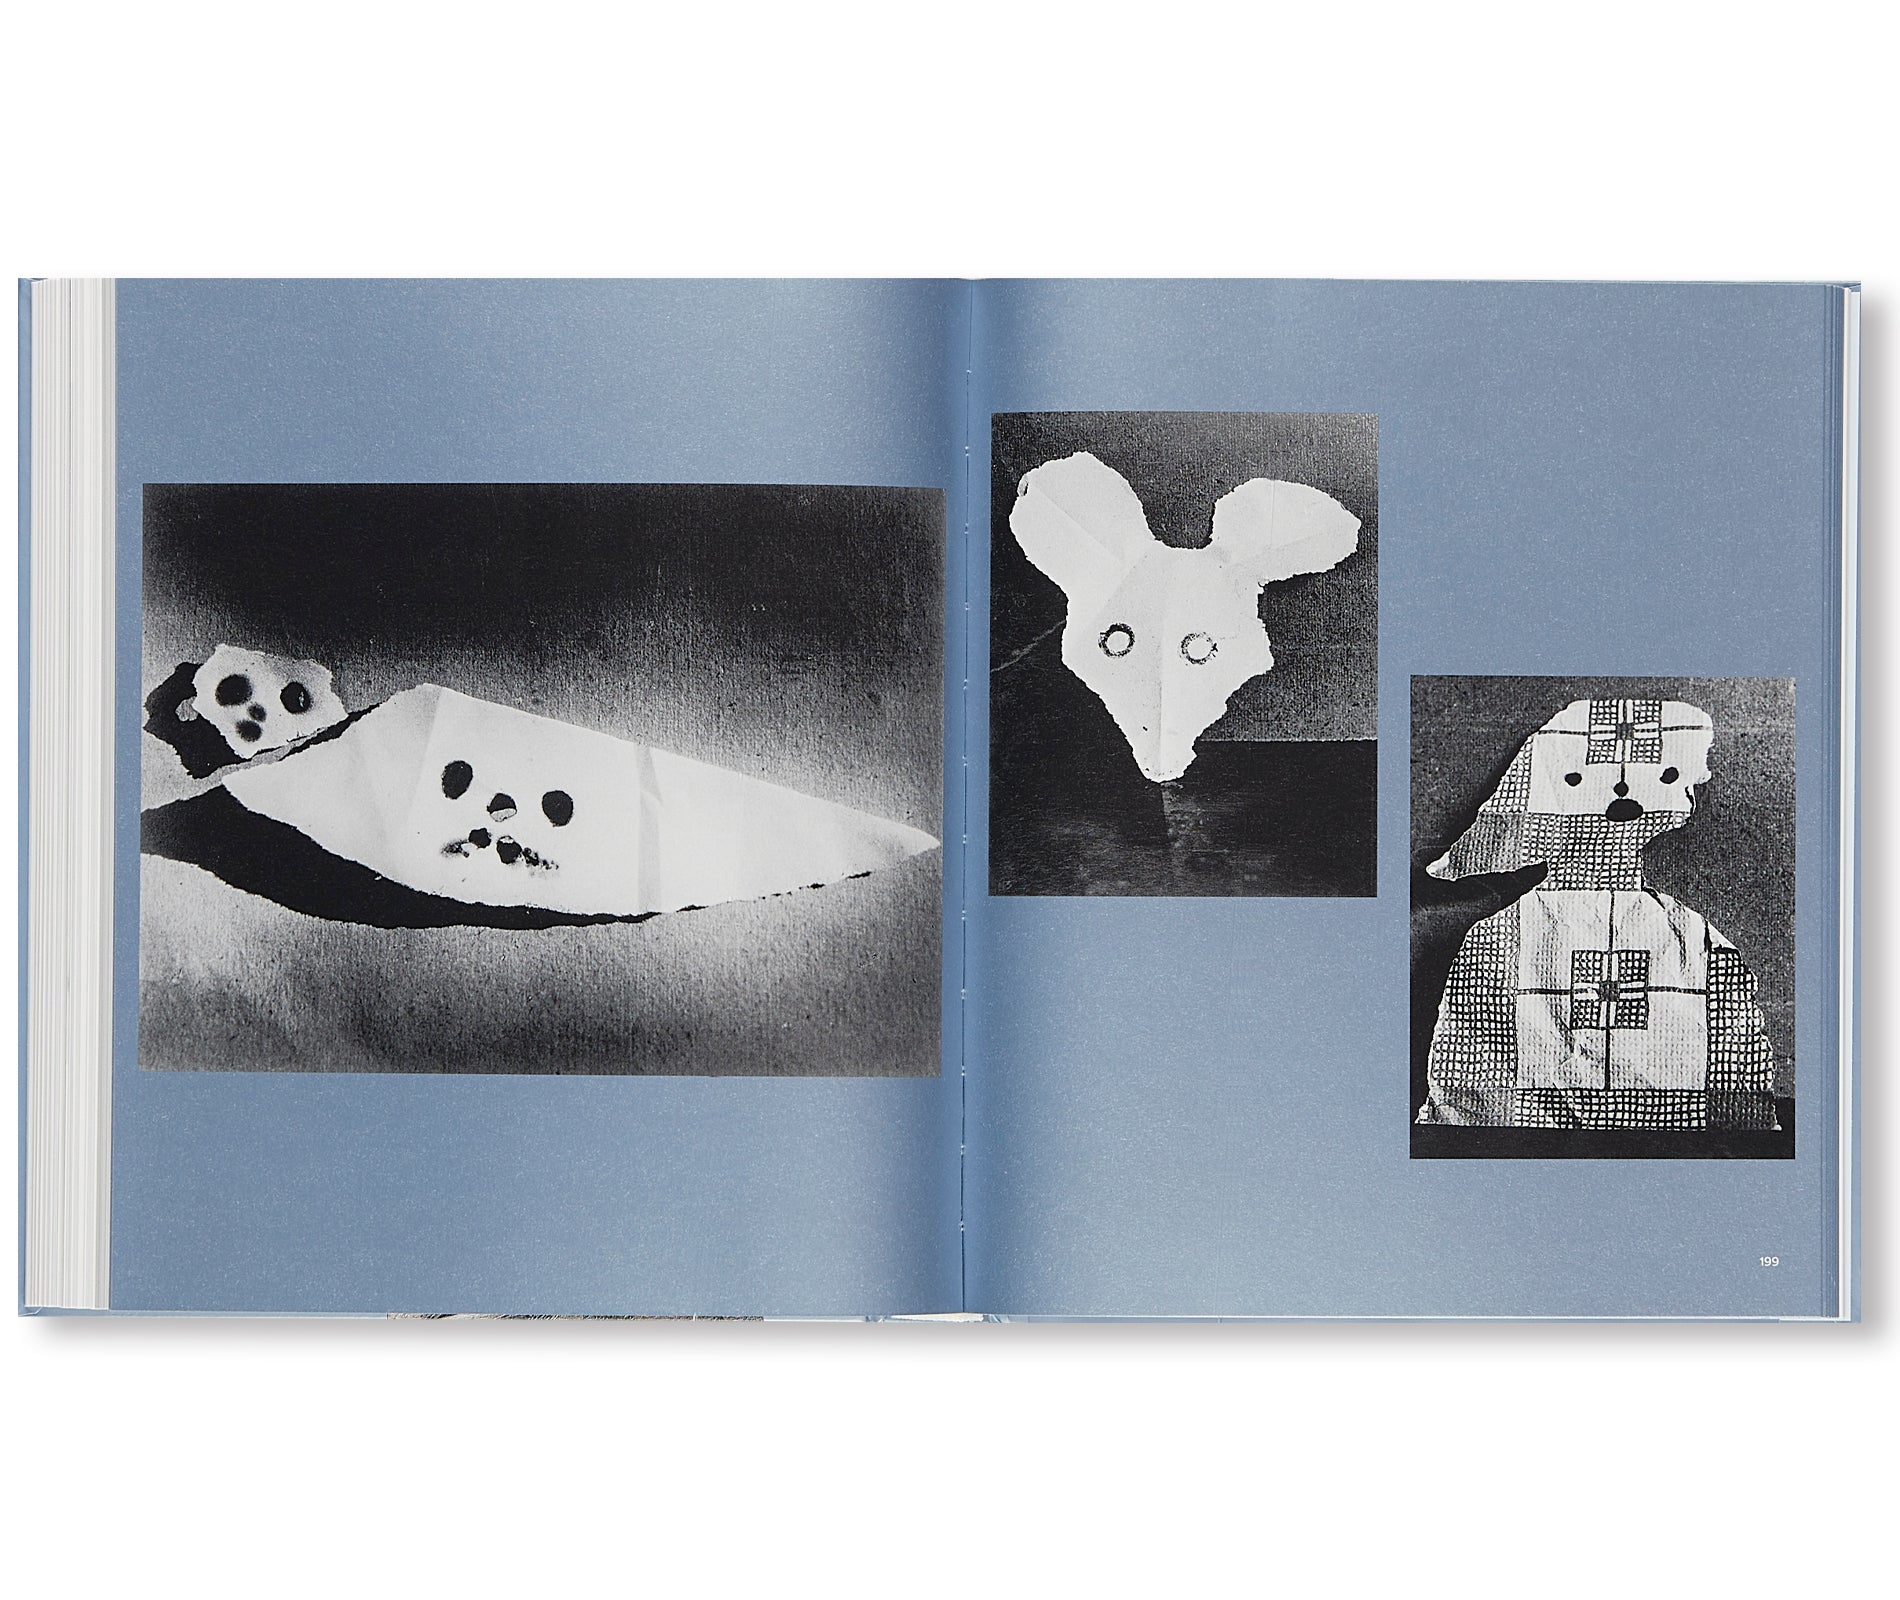 PICASSO CUT PAPERS by Pablo Picasso – twelvebooks